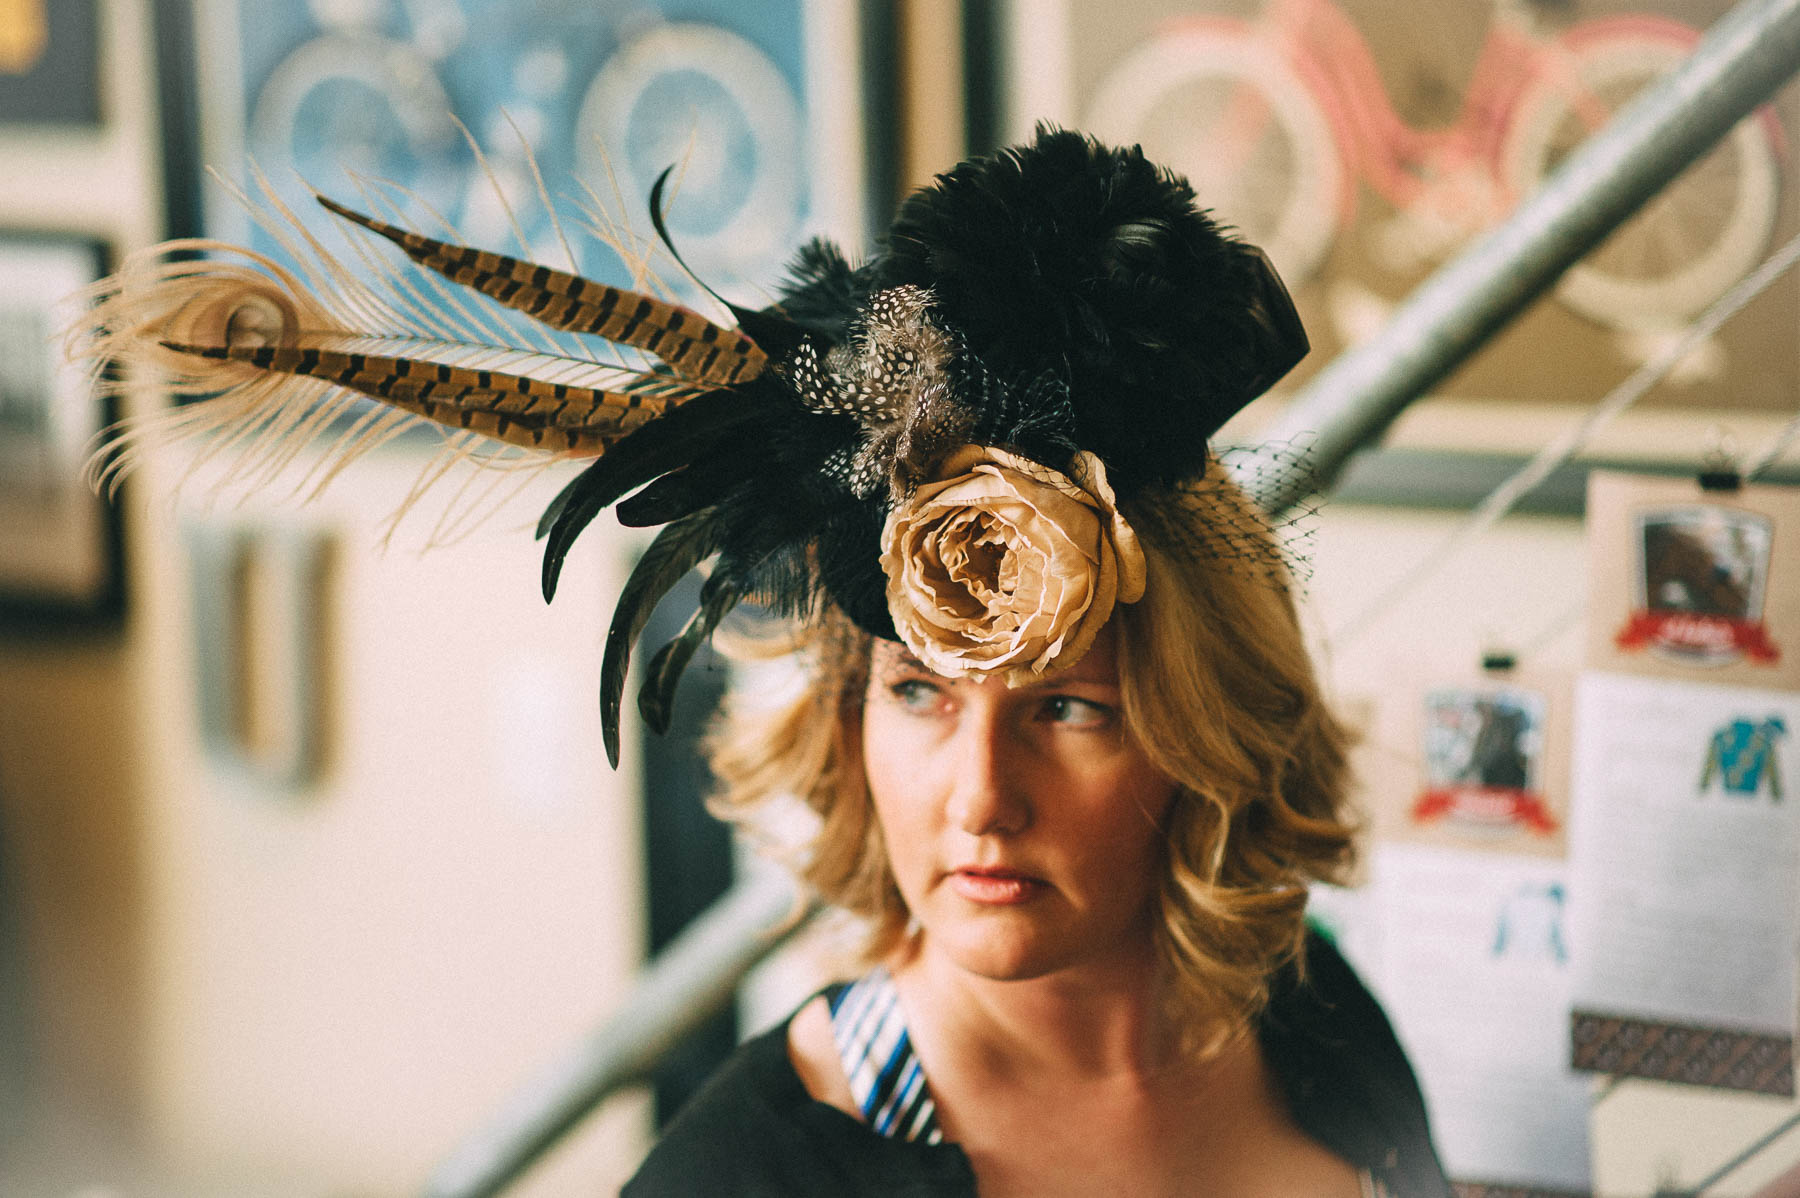 2015 Kentucky Derby Party at Bobby and Kim’s Seattle condo.